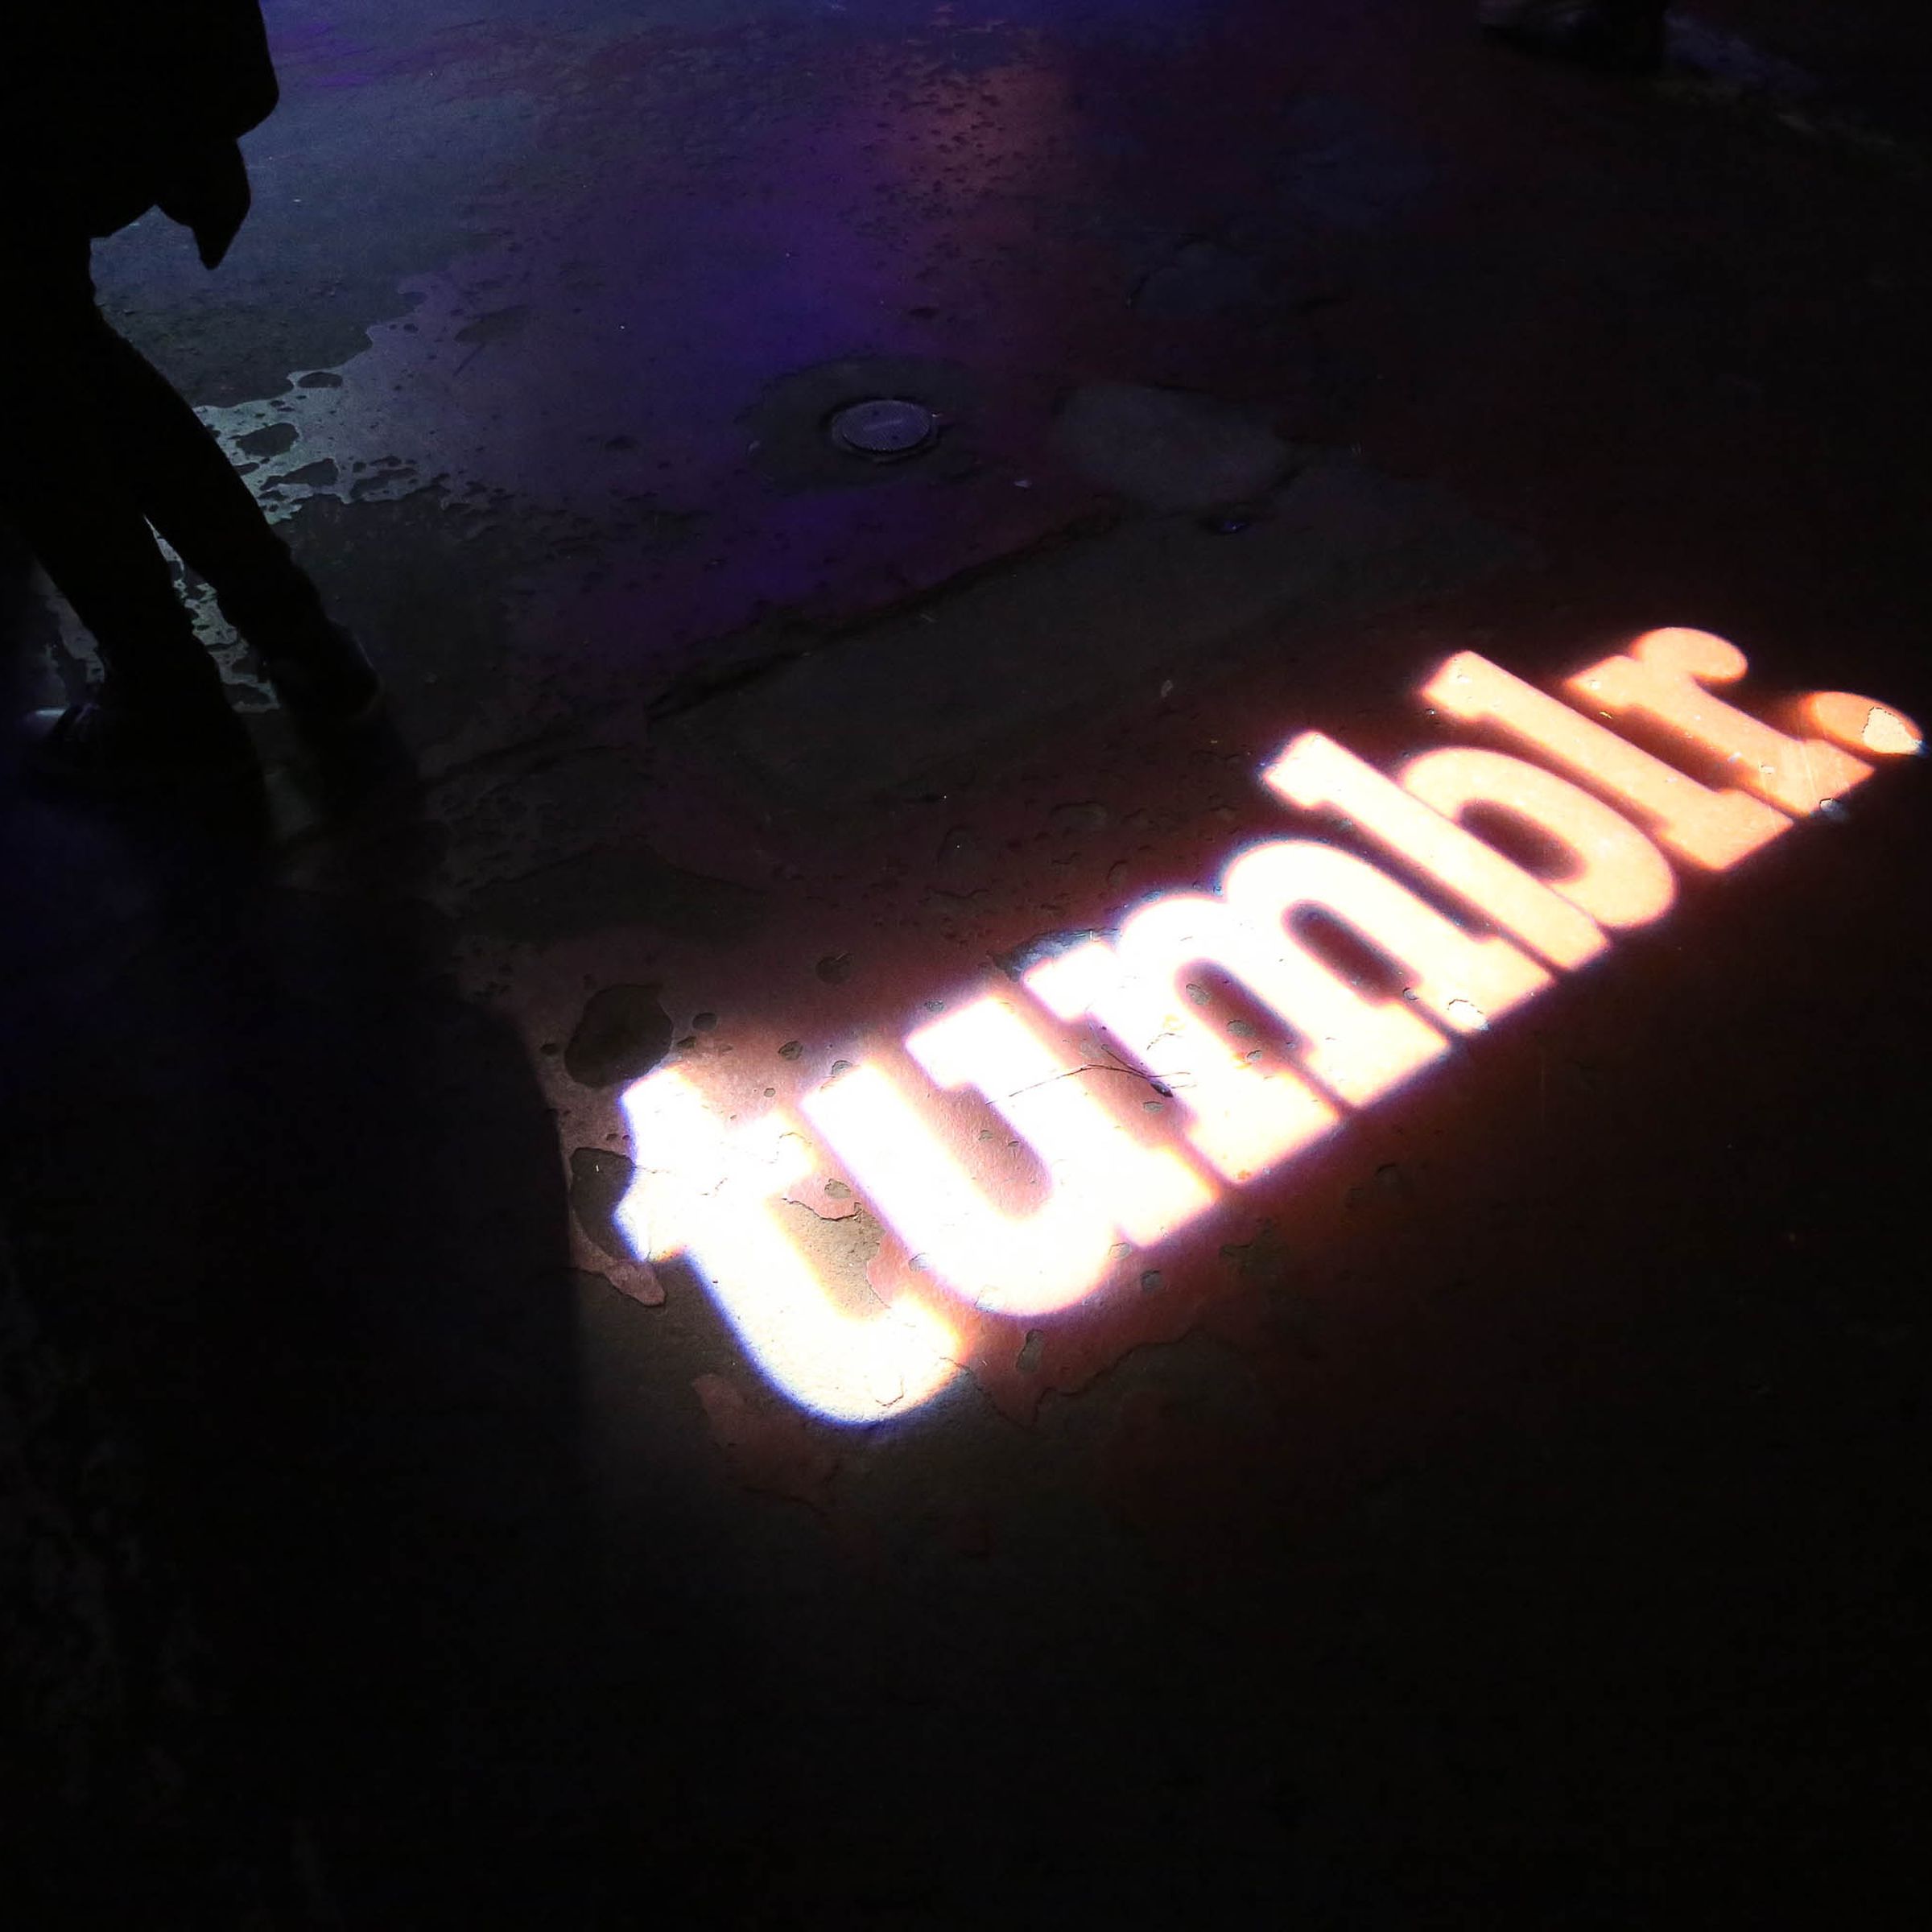 Tumblr’s Year In Review 2014